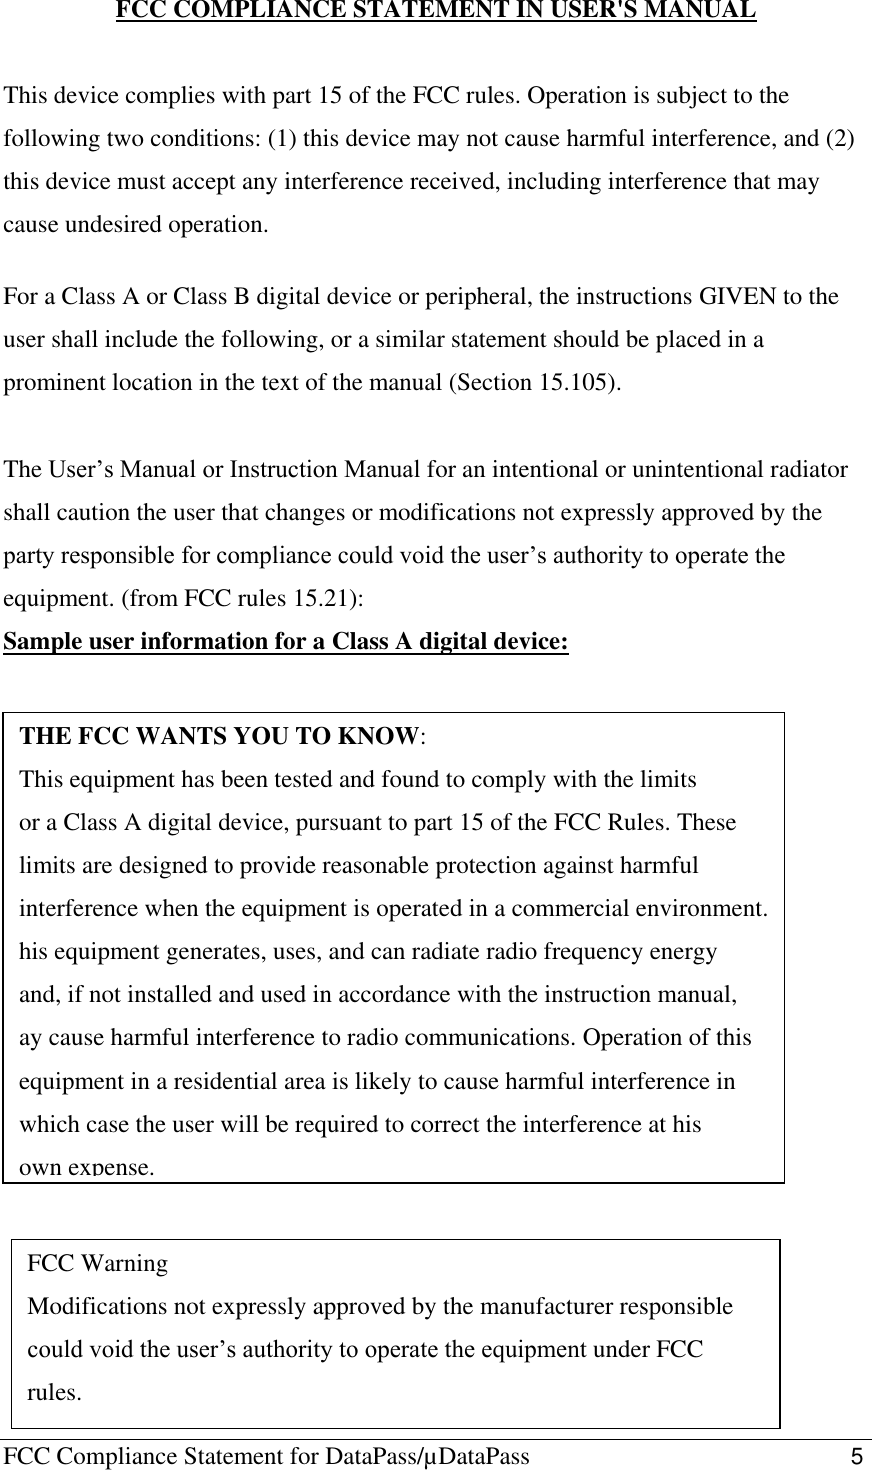 FCC Compliance Statement for DataPass/µDataPass                                                   5  FCC COMPLIANCE STATEMENT IN USER&apos;S MANUAL  This device complies with part 15 of the FCC rules. Operation is subject to the following two conditions: (1) this device may not cause harmful interference, and (2) this device must accept any interference received, including interference that may cause undesired operation.  For a Class A or Class B digital device or peripheral, the instructions GIVEN to the user shall include the following, or a similar statement should be placed in a prominent location in the text of the manual (Section 15.105).  The User’s Manual or Instruction Manual for an intentional or unintentional radiator shall caution the user that changes or modifications not expressly approved by the party responsible for compliance could void the user’s authority to operate the equipment. (from FCC rules 15.21): Sample user information for a Class A digital device:                 THE FCC WANTS YOU TO KNOW: This equipment has been tested and found to comply with the limits or a Class A digital device, pursuant to part 15 of the FCC Rules. These limits are designed to provide reasonable protection against harmful interference when the equipment is operated in a commercial environment. his equipment generates, uses, and can radiate radio frequency energy and, if not installed and used in accordance with the instruction manual, ay cause harmful interference to radio communications. Operation of this equipment in a residential area is likely to cause harmful interference in which case the user will be required to correct the interference at his own expense. FCC Warning Modifications not expressly approved by the manufacturer responsible could void the user’s authority to operate the equipment under FCC rules. 